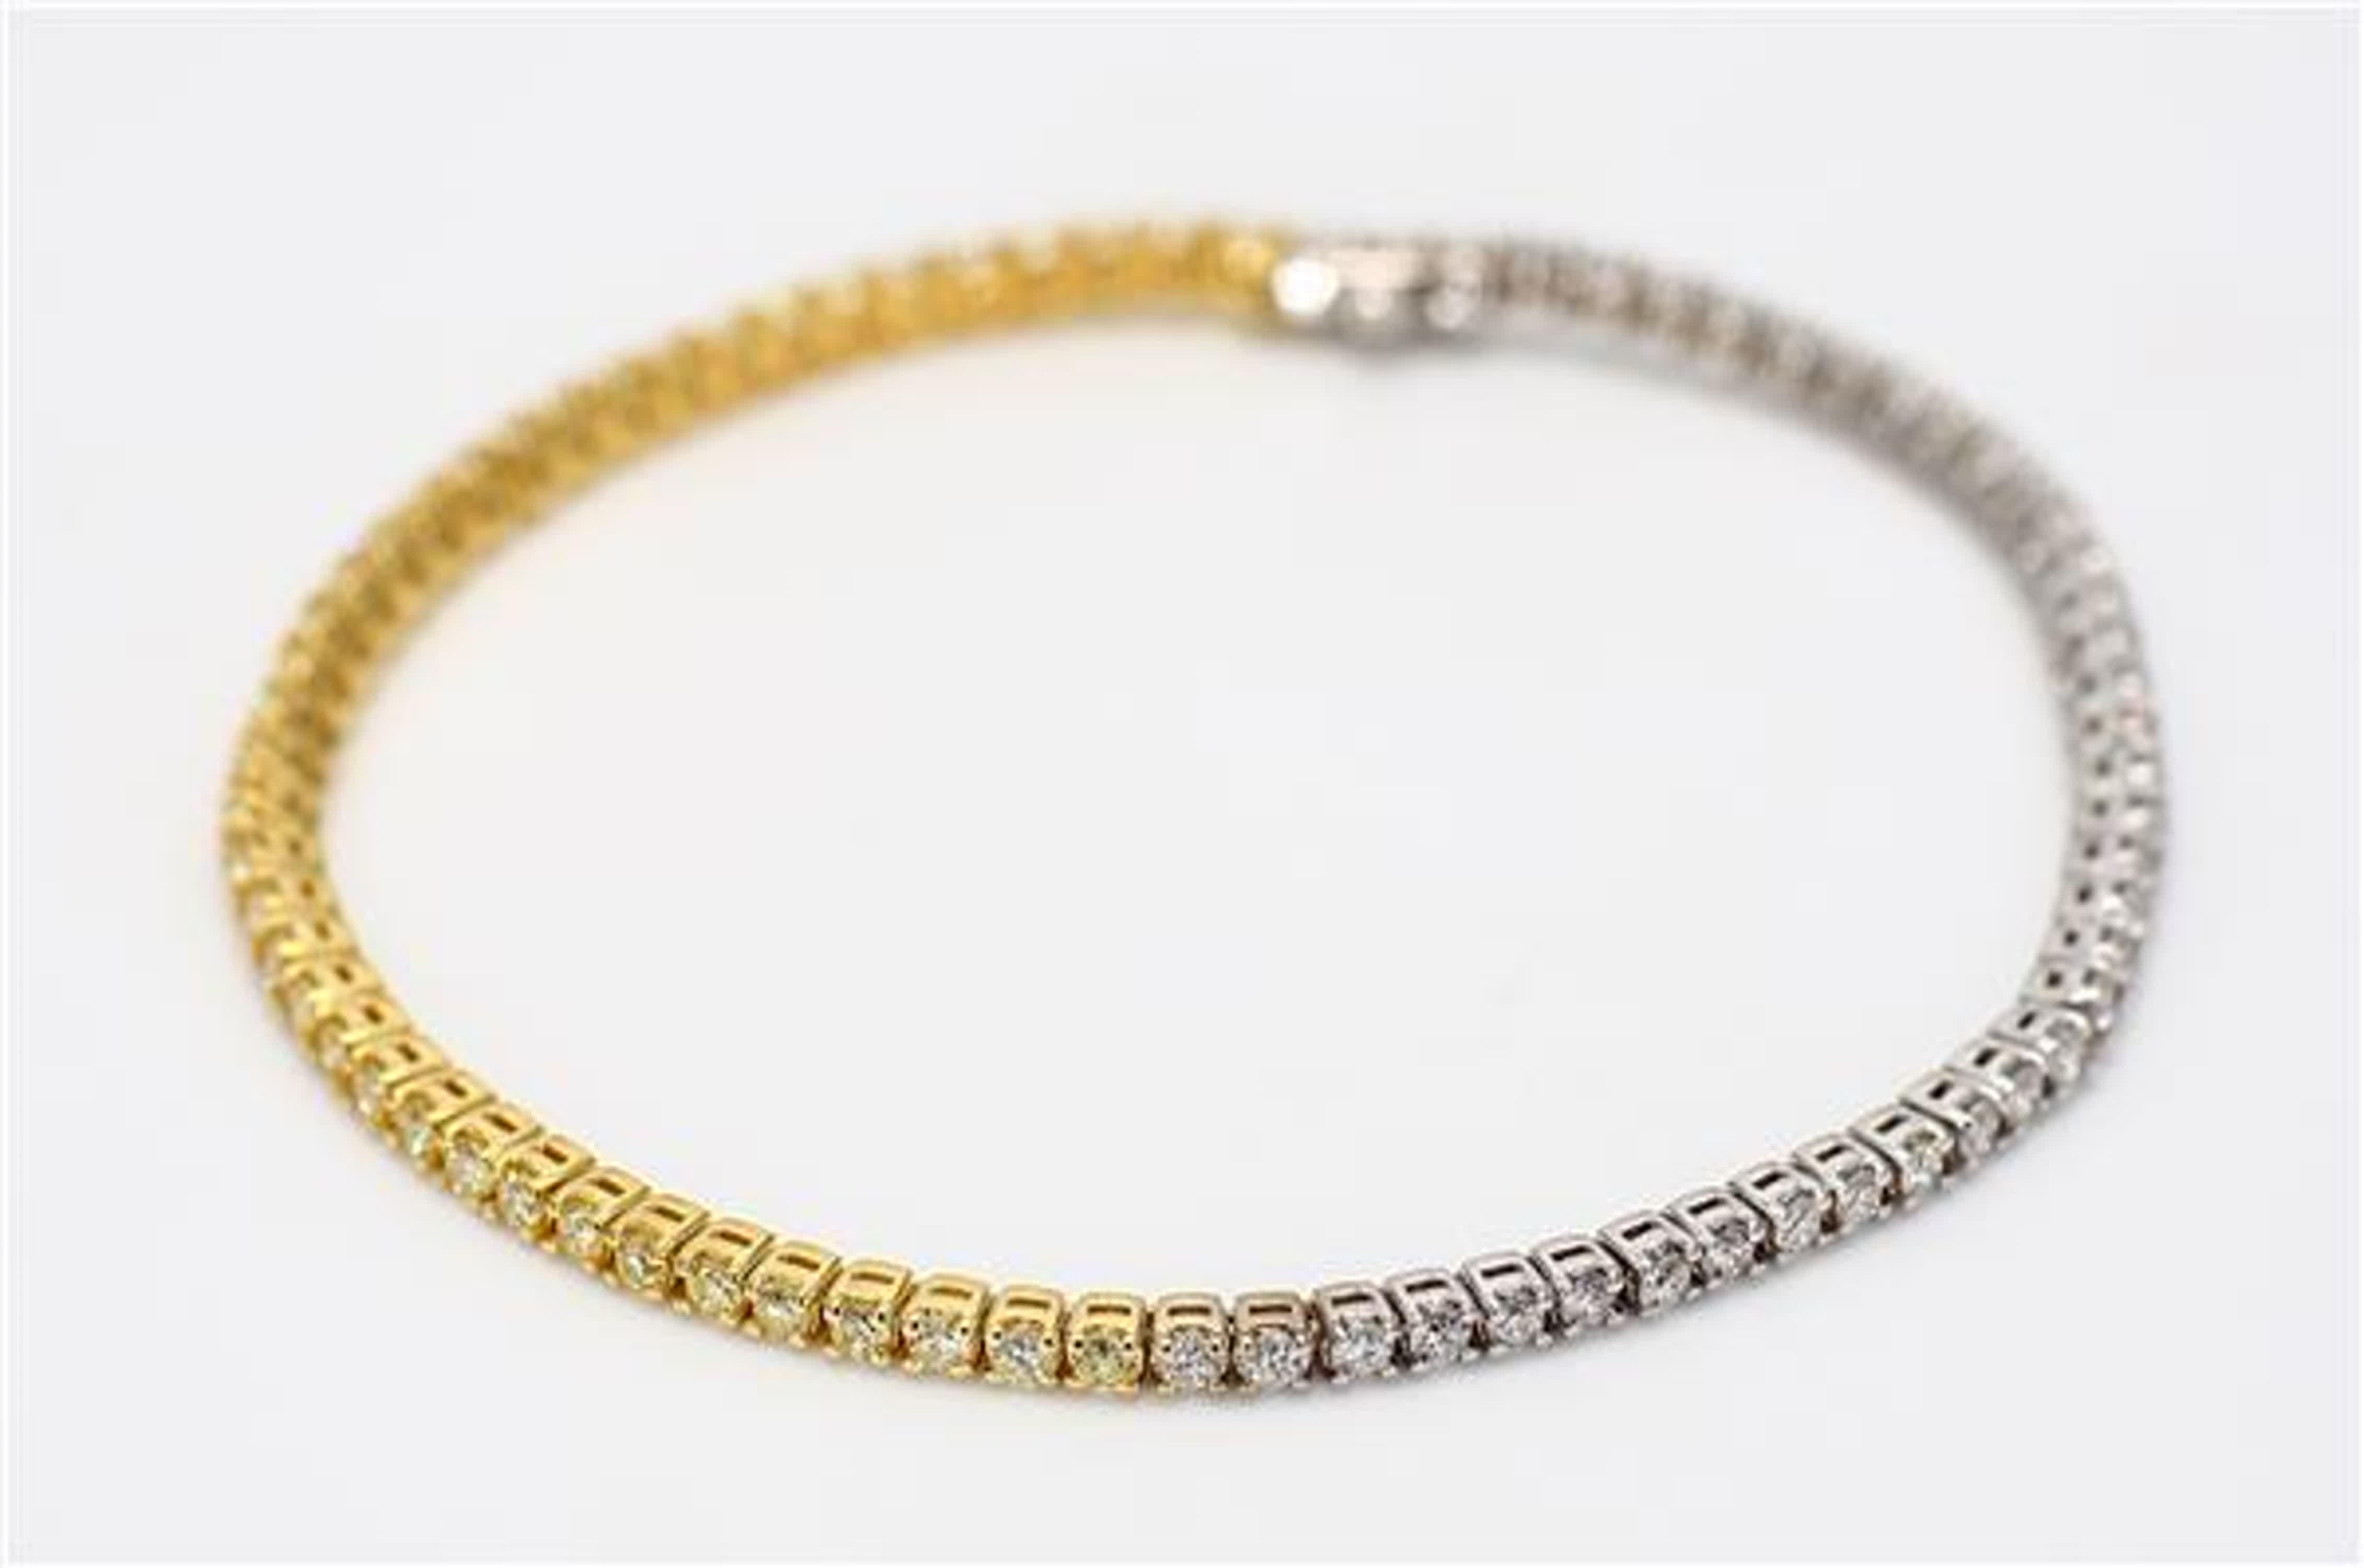 RareGemWorld's classic diamond bracelet. Mounted in a beautiful 18K Yellow and White Gold setting with natural round cut yellow diamond melee complimented by natural round cut white diamond melee. This bracelet is guaranteed to impress and will